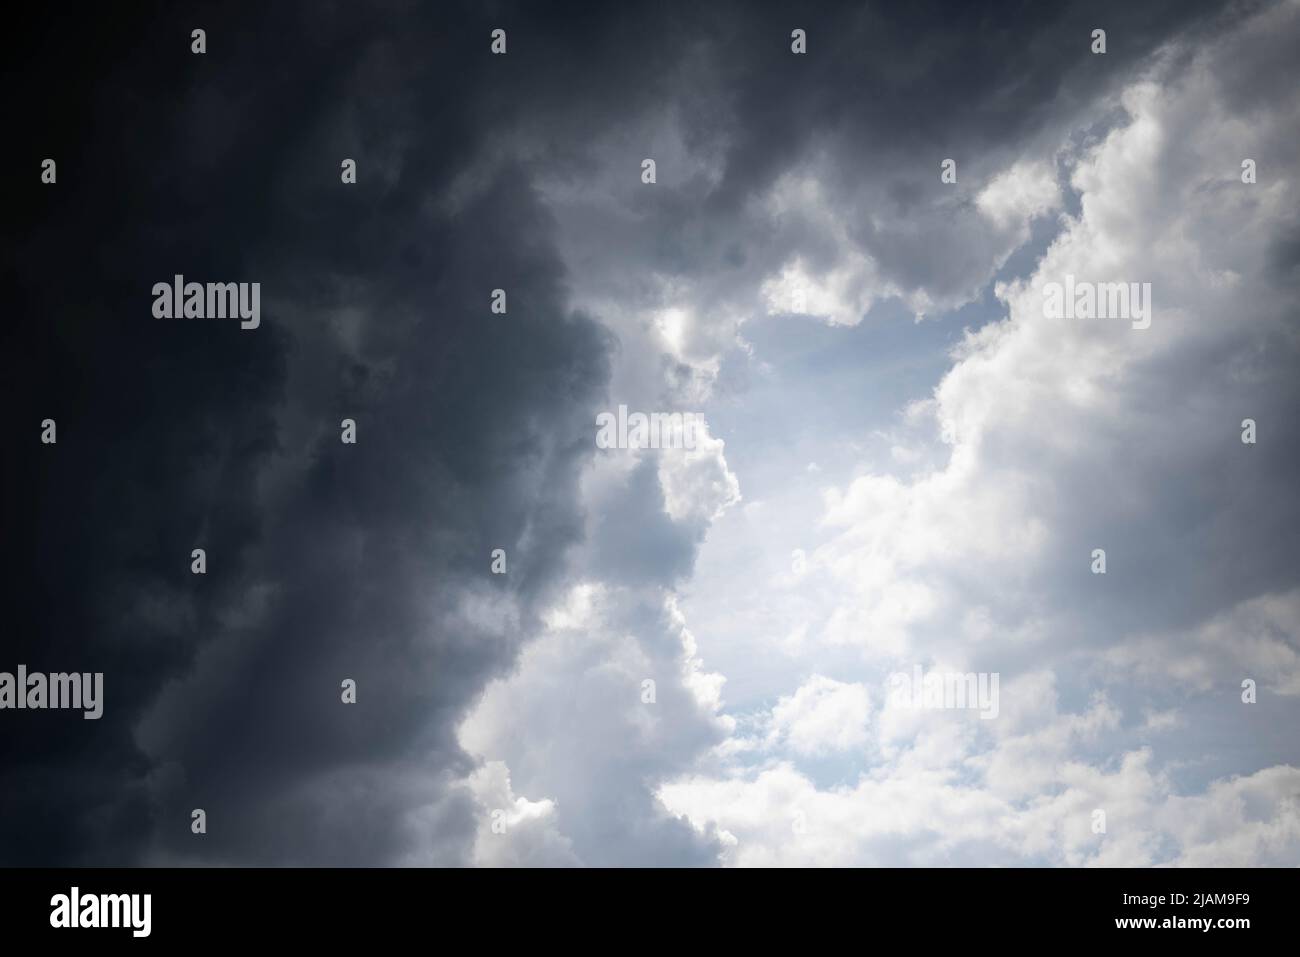 Black and White clouds - Battle of good and evil and the gods concept idea Stock Photo